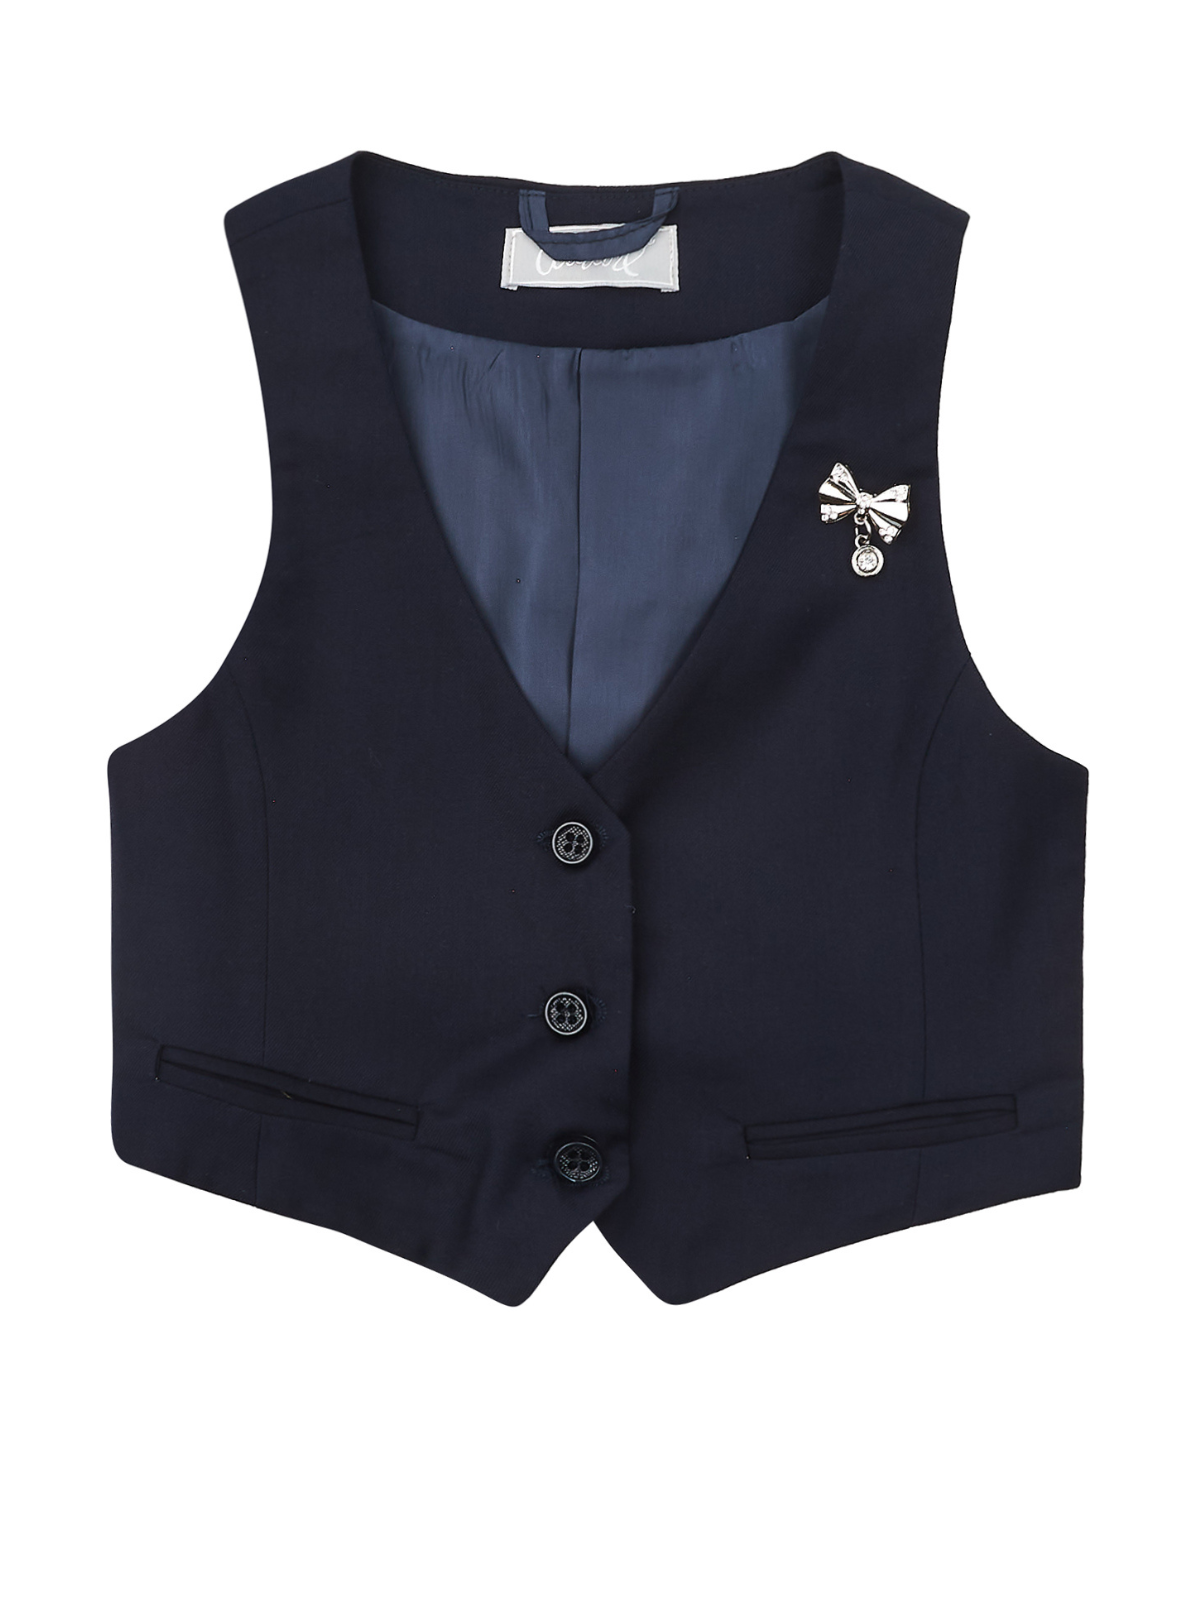 Classic Navy Girls Bow Pin Vest by Kids Couture